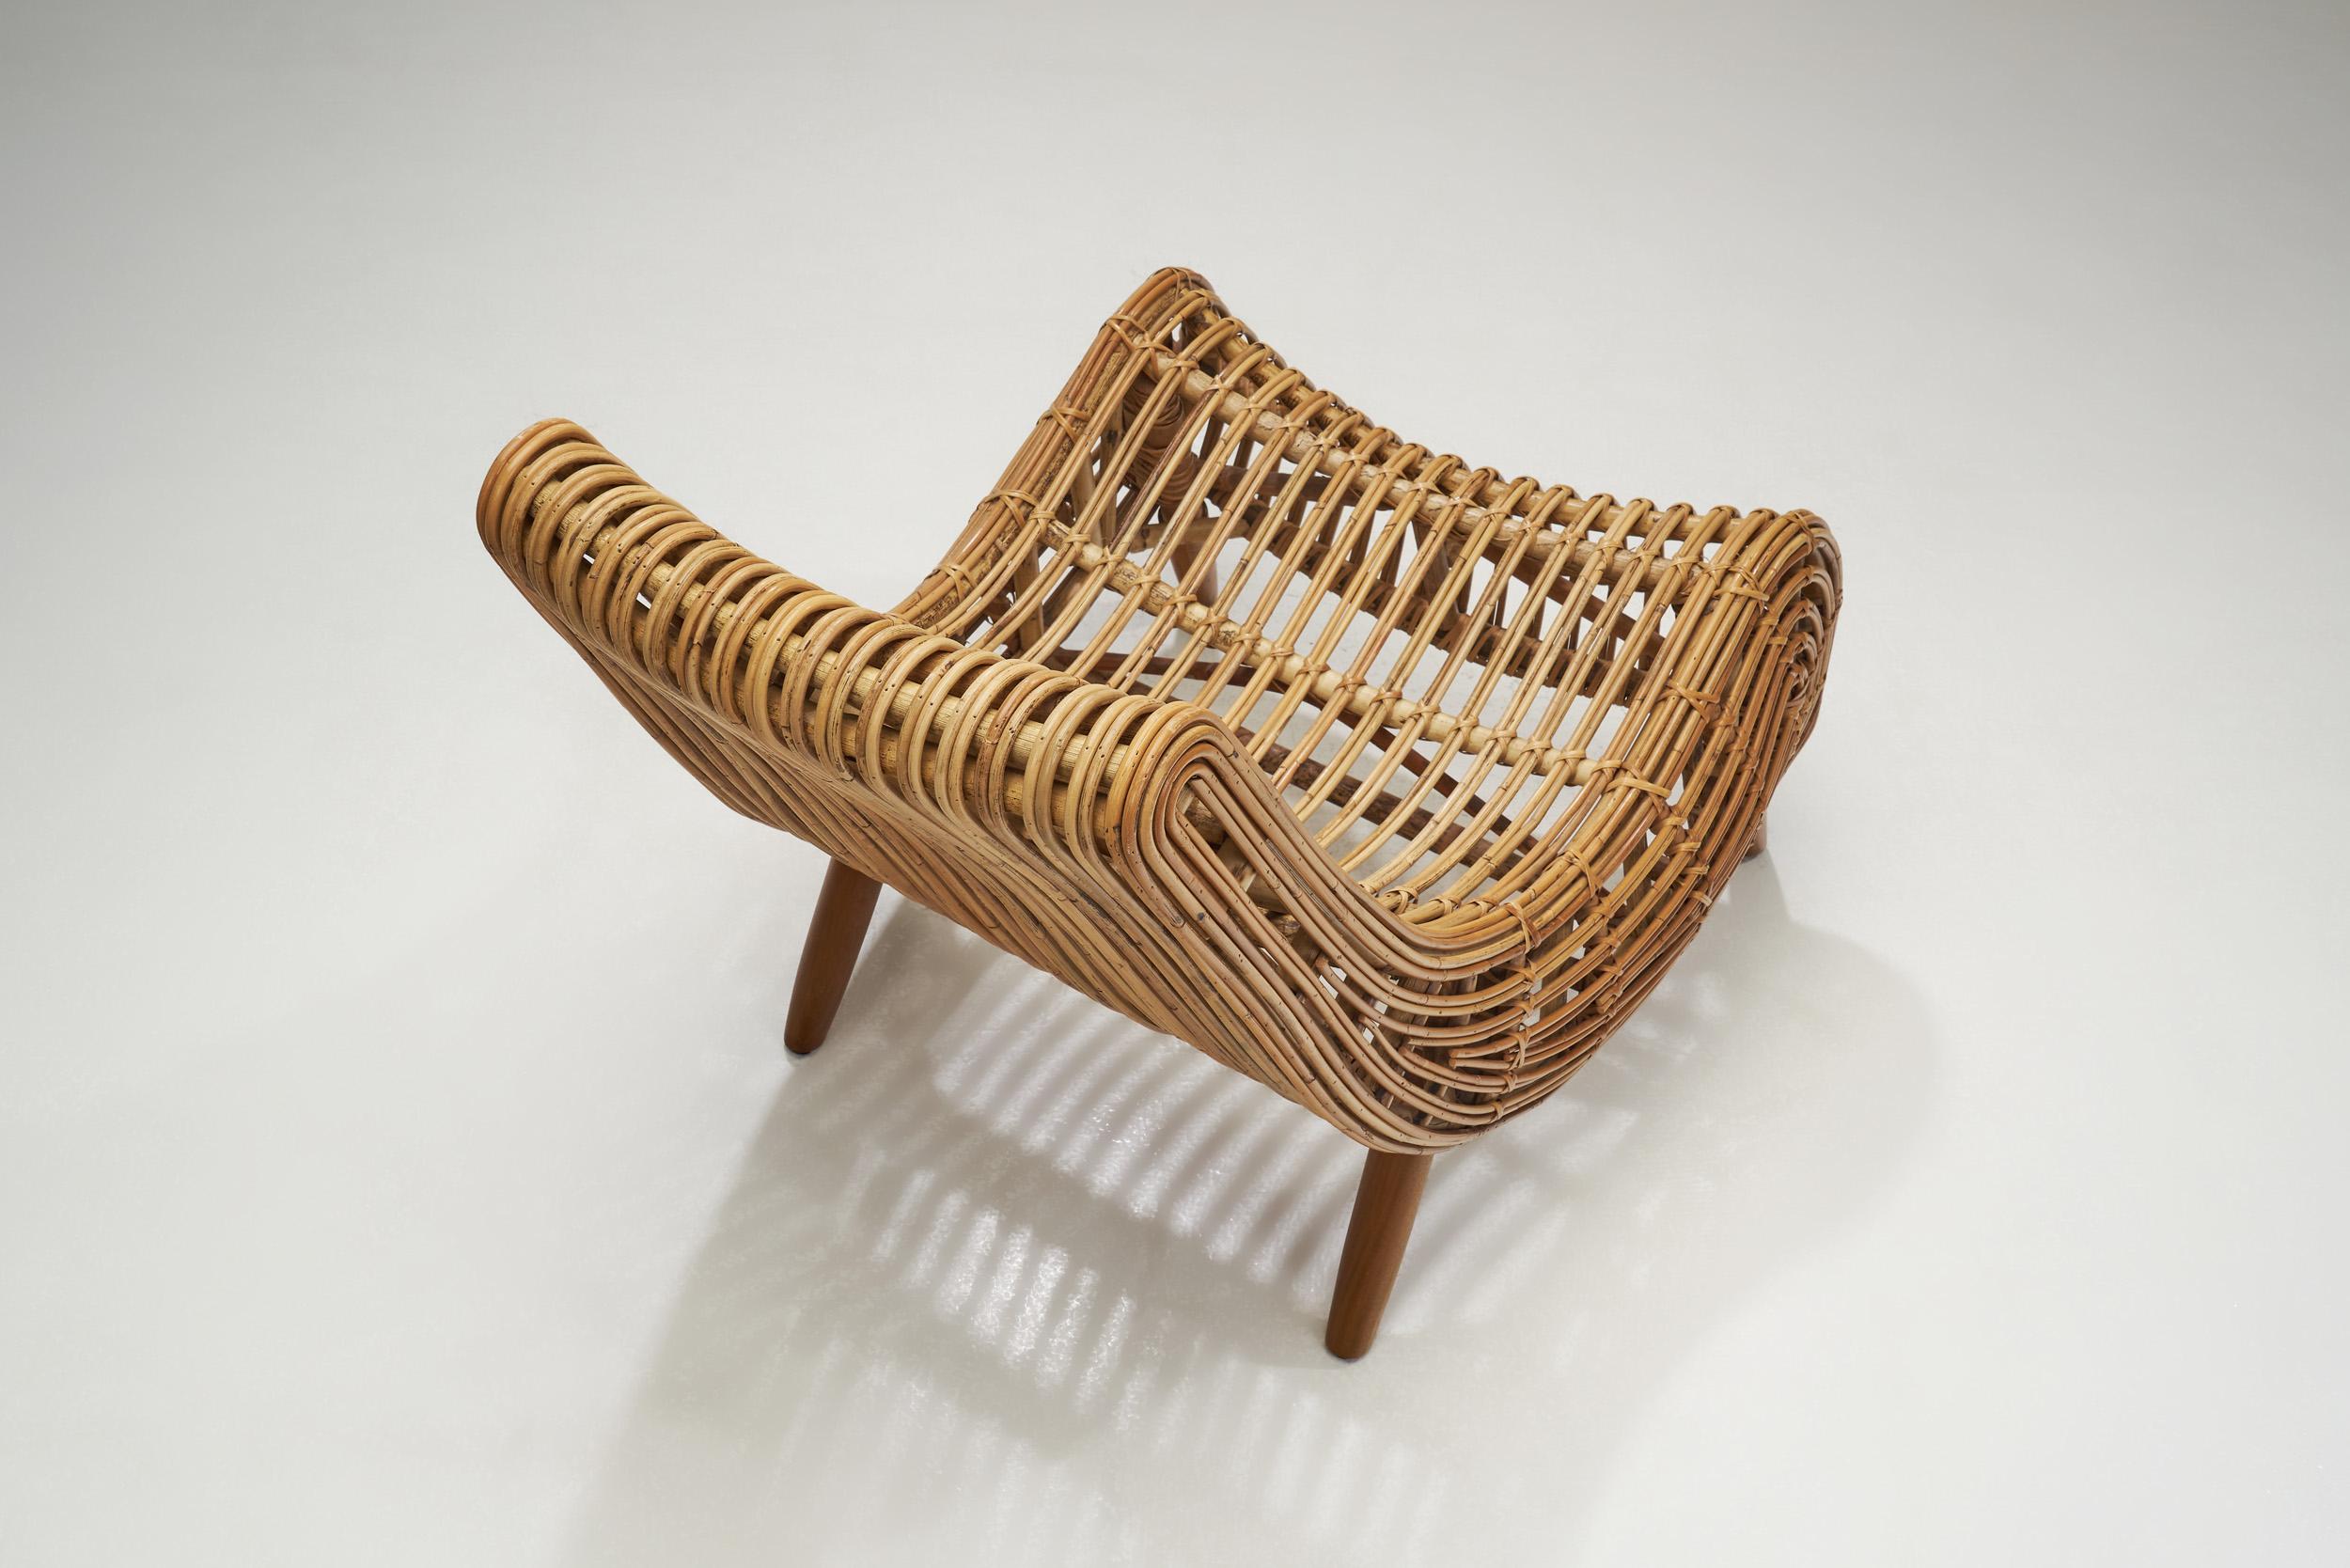 Mid-20th Century Piero Palange and Werther Toffoloni Lounge Chair for Gervasoni, Italy 1960s